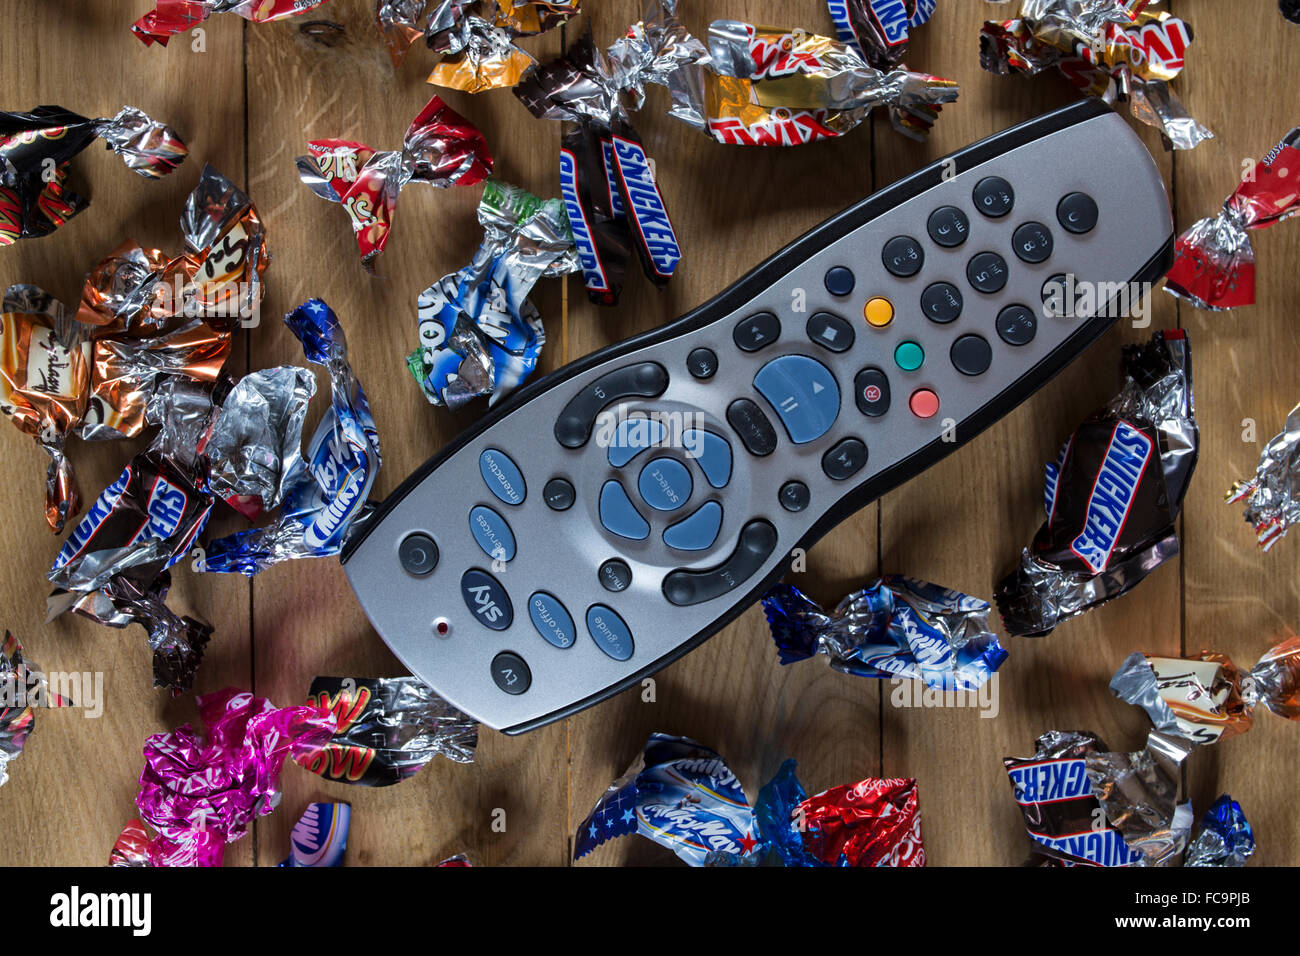 TV remote control surrounded by sweet wrappers at Christmas. Stock Photo